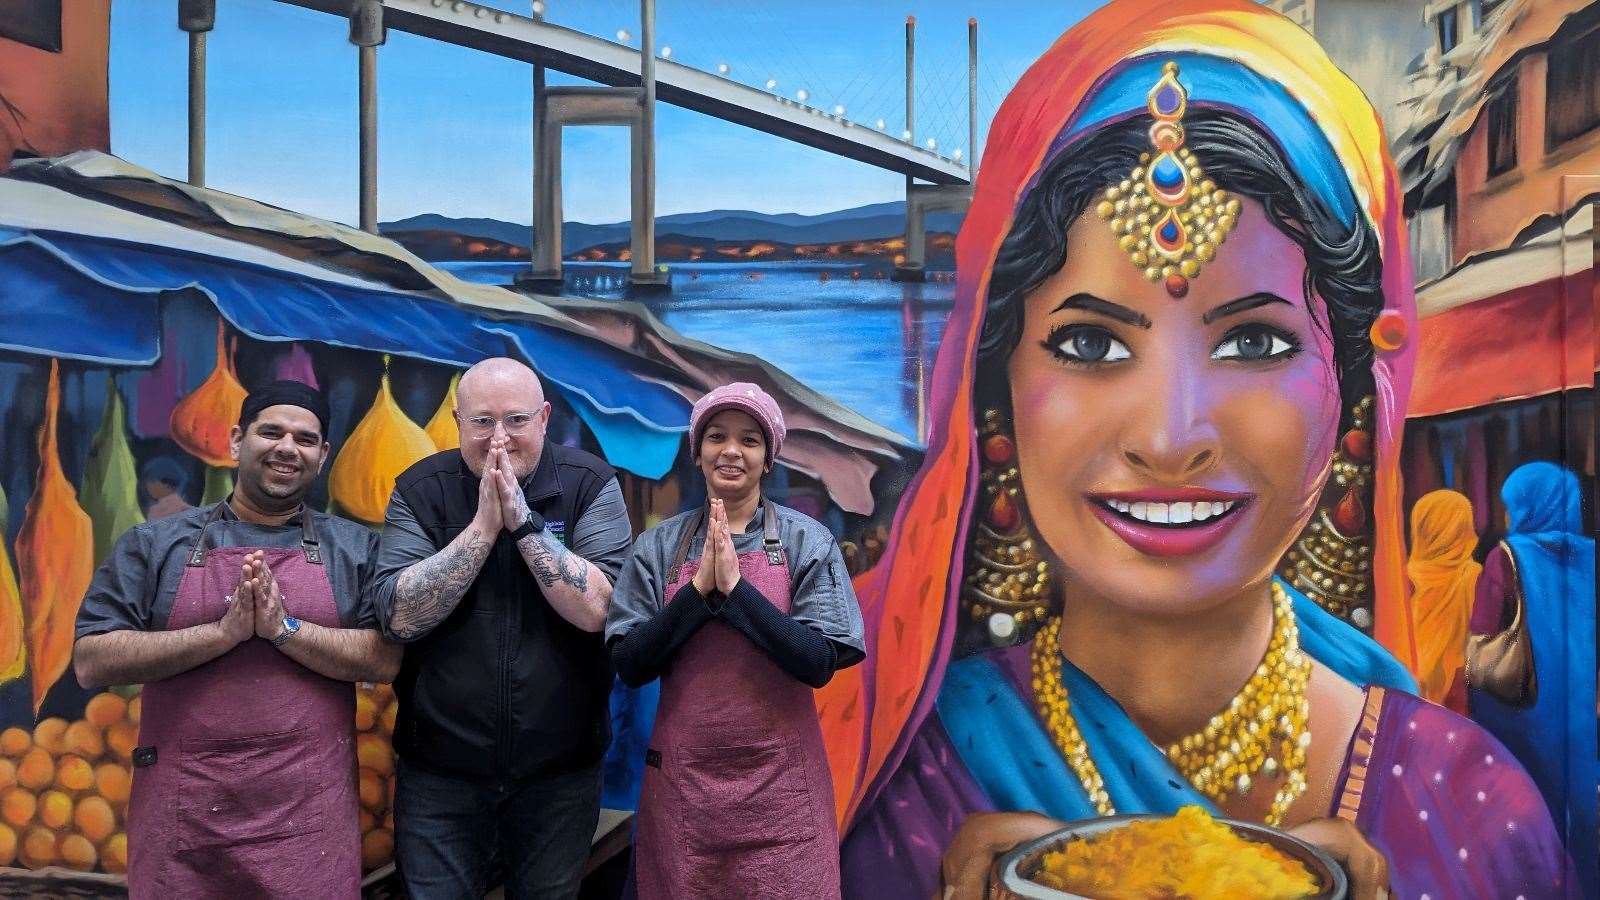 Cameron MacFarlane alongside the staff at Namaste standing in front of the new mural in the Victorian Market.